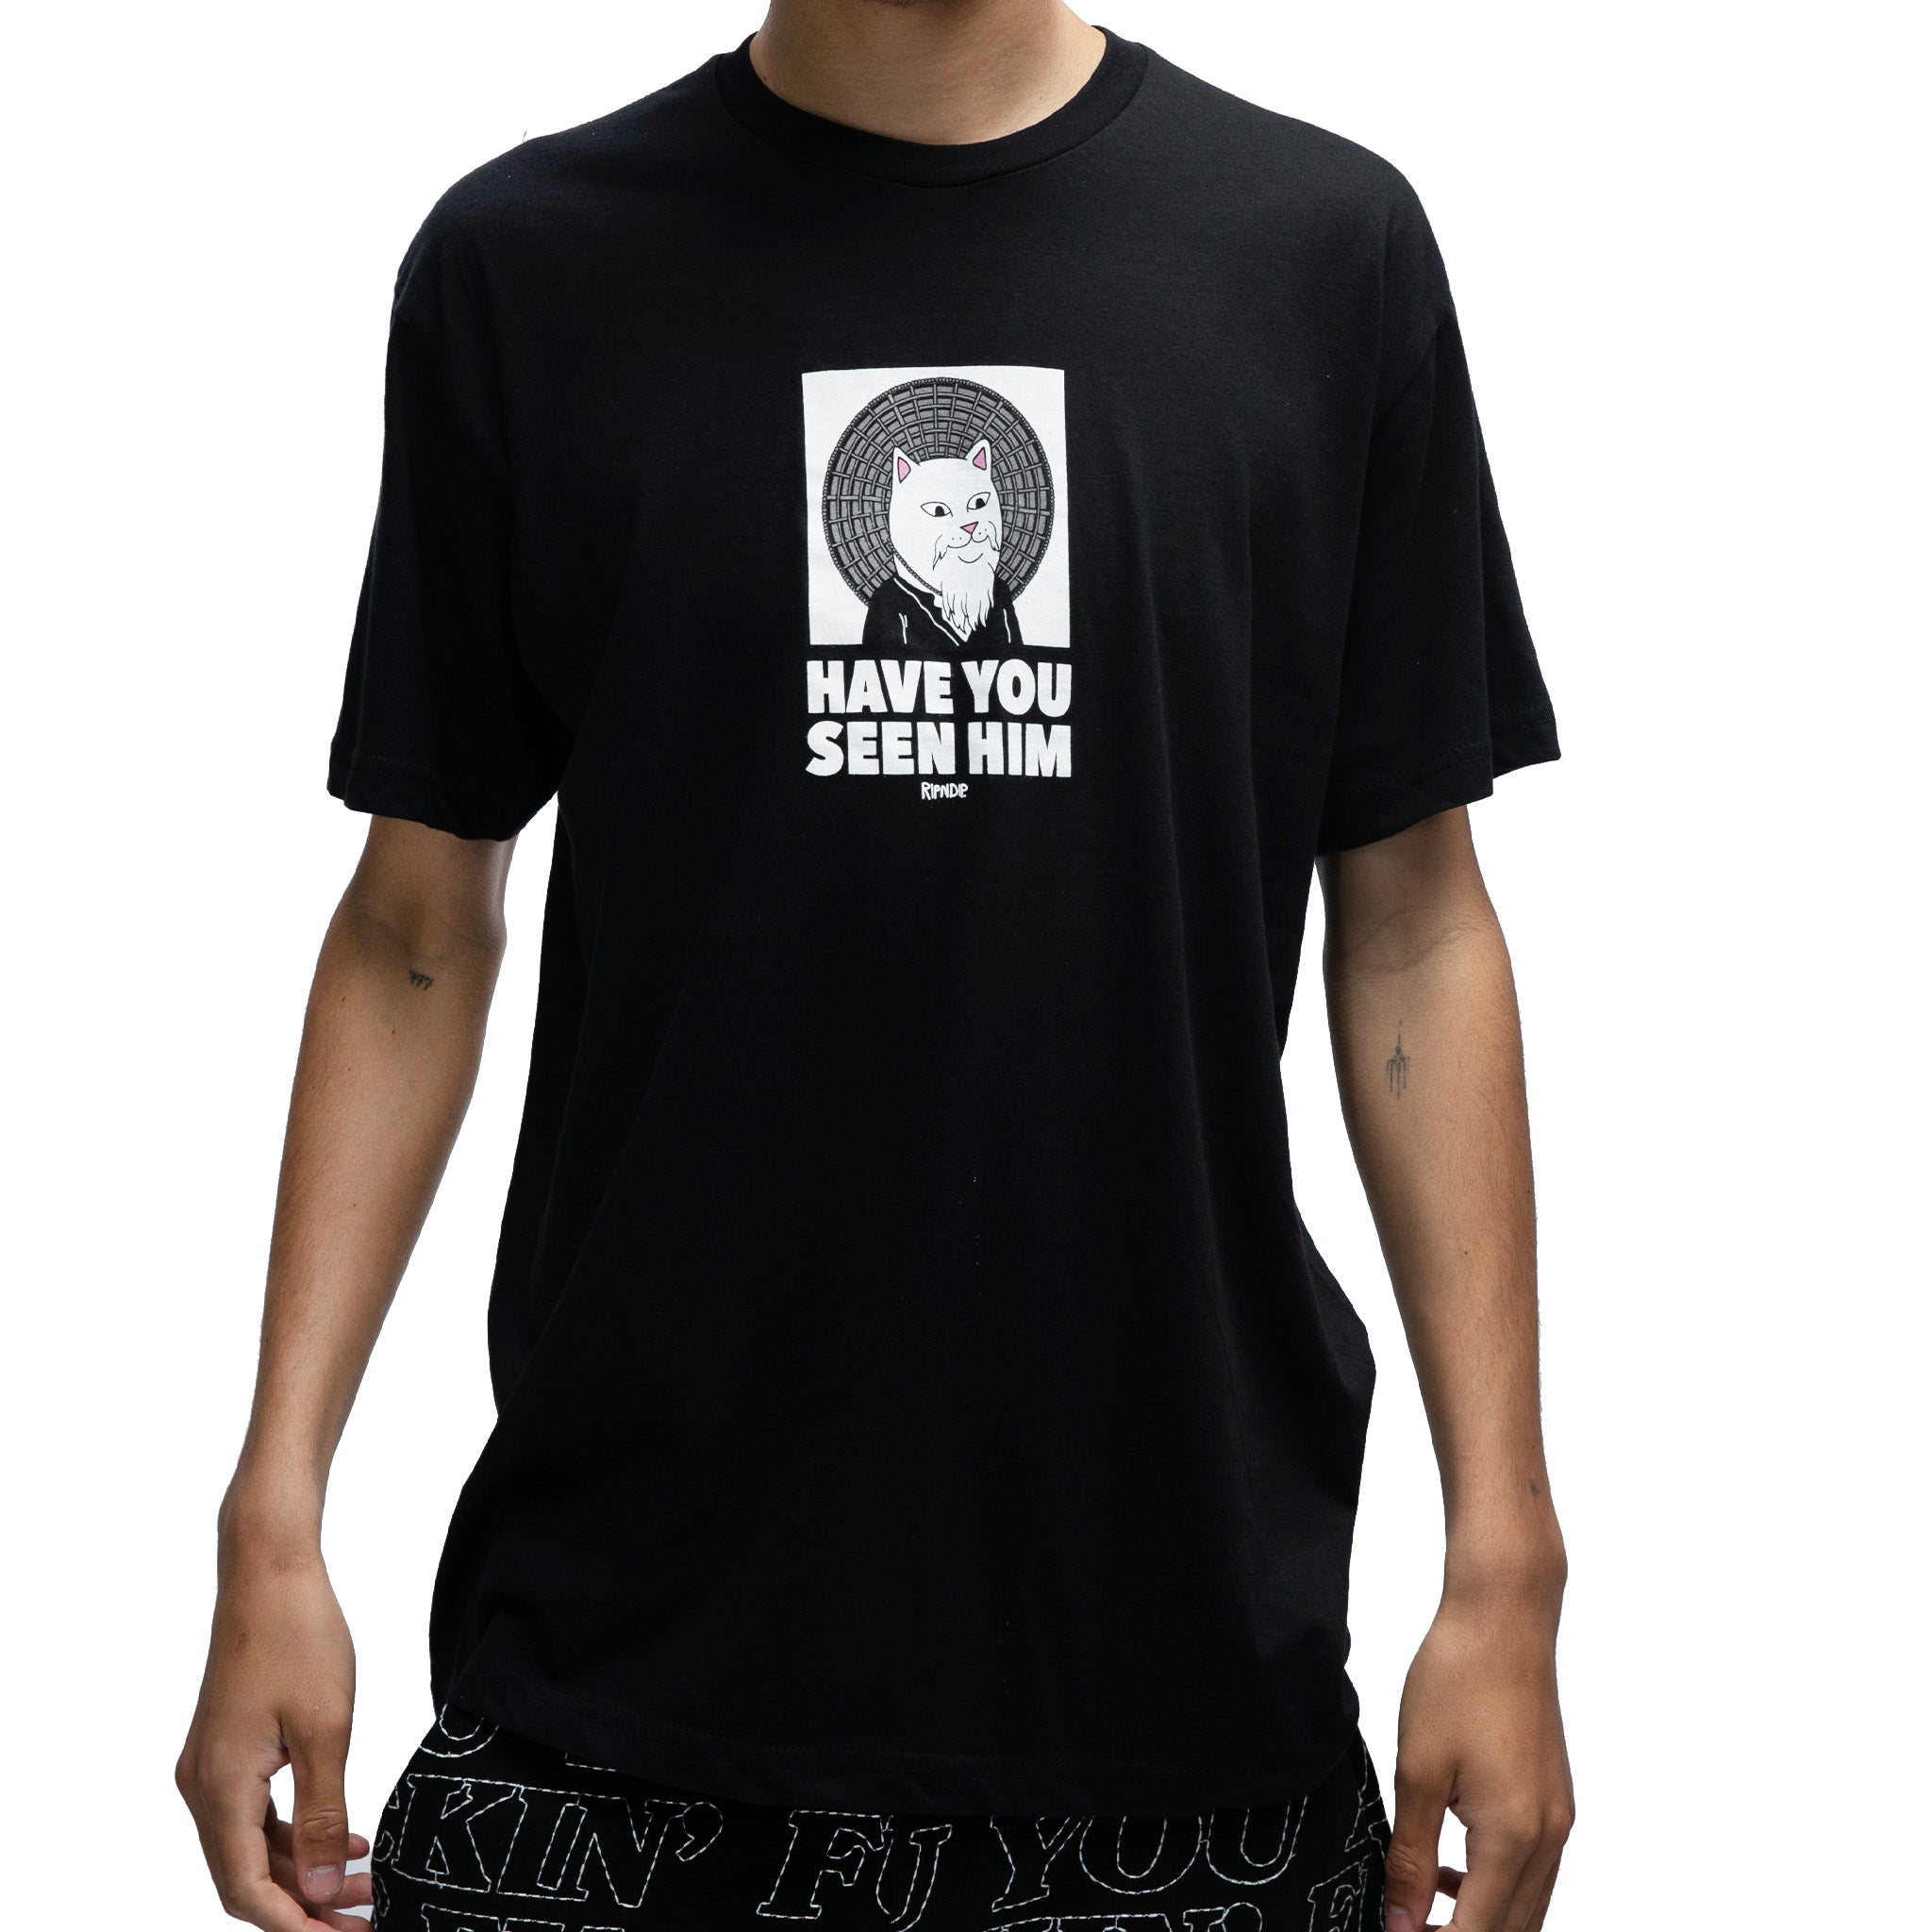 Have You Seen Him? Tee (Black)